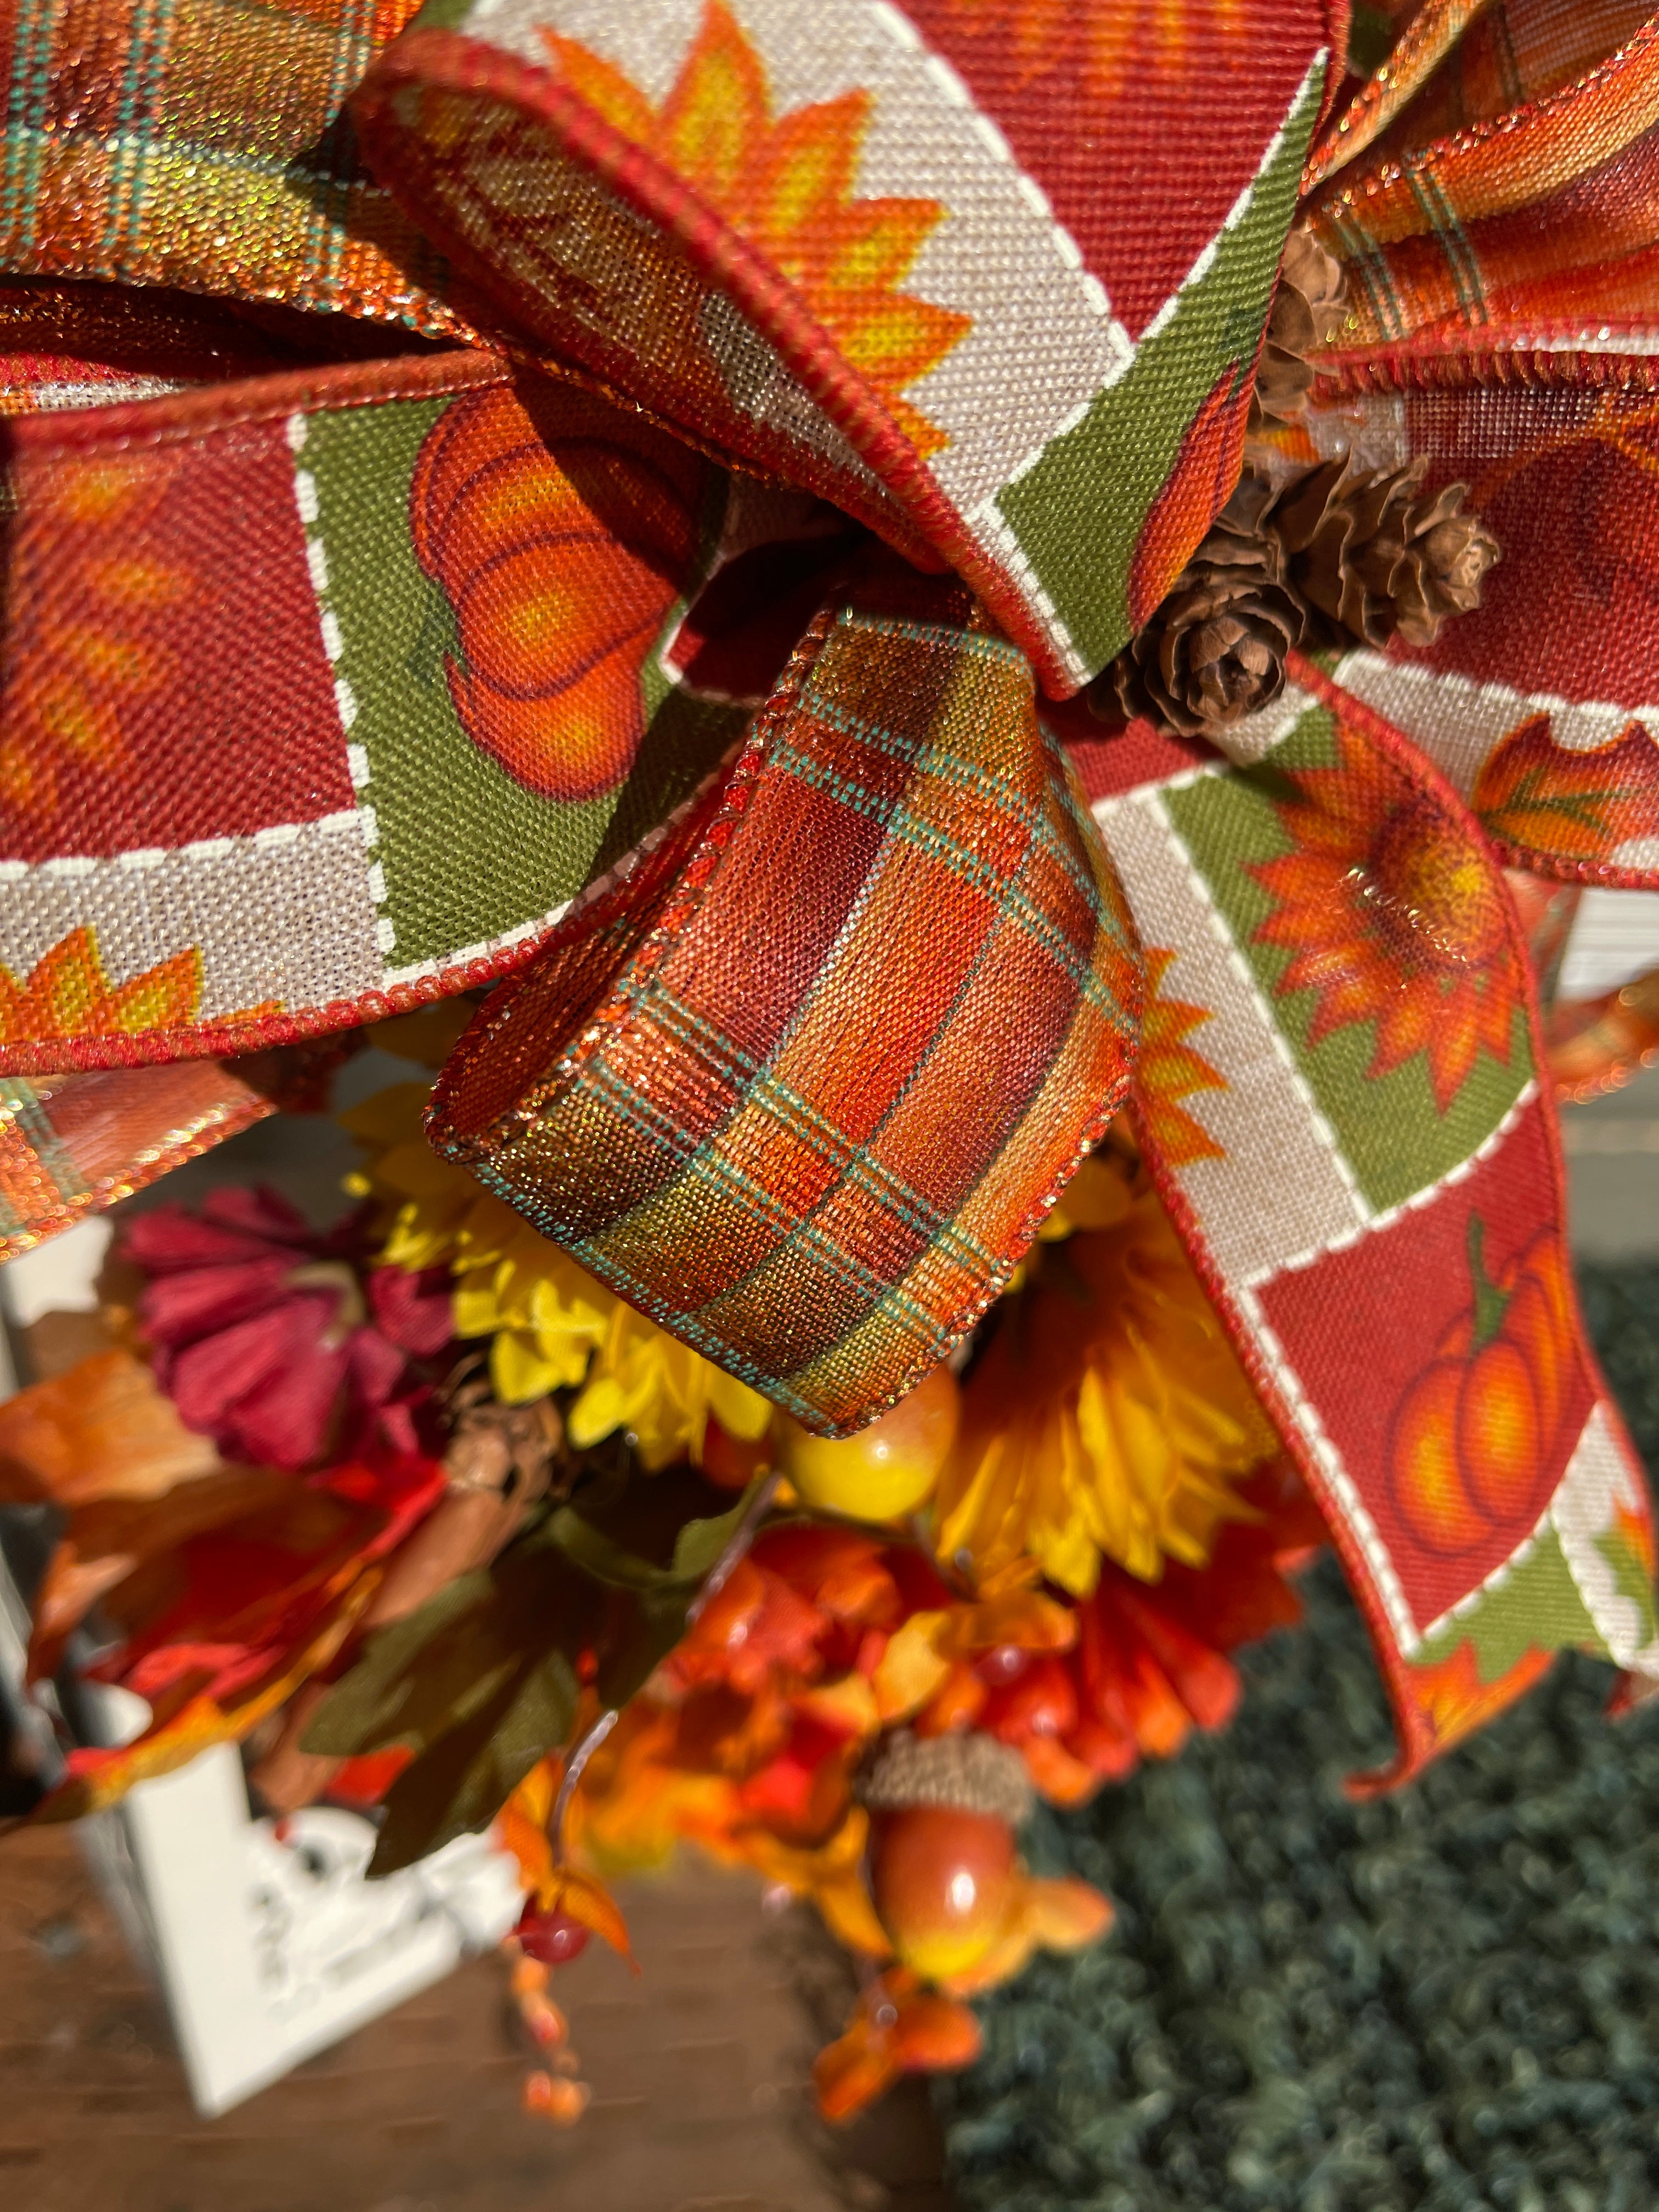 Close Up Detail of Ribbon in Fall Bow with Orange, Red, tan, Green and White, with Pumpkins and Sunflowers on the Print, Pine Cones in the Center of the Bow